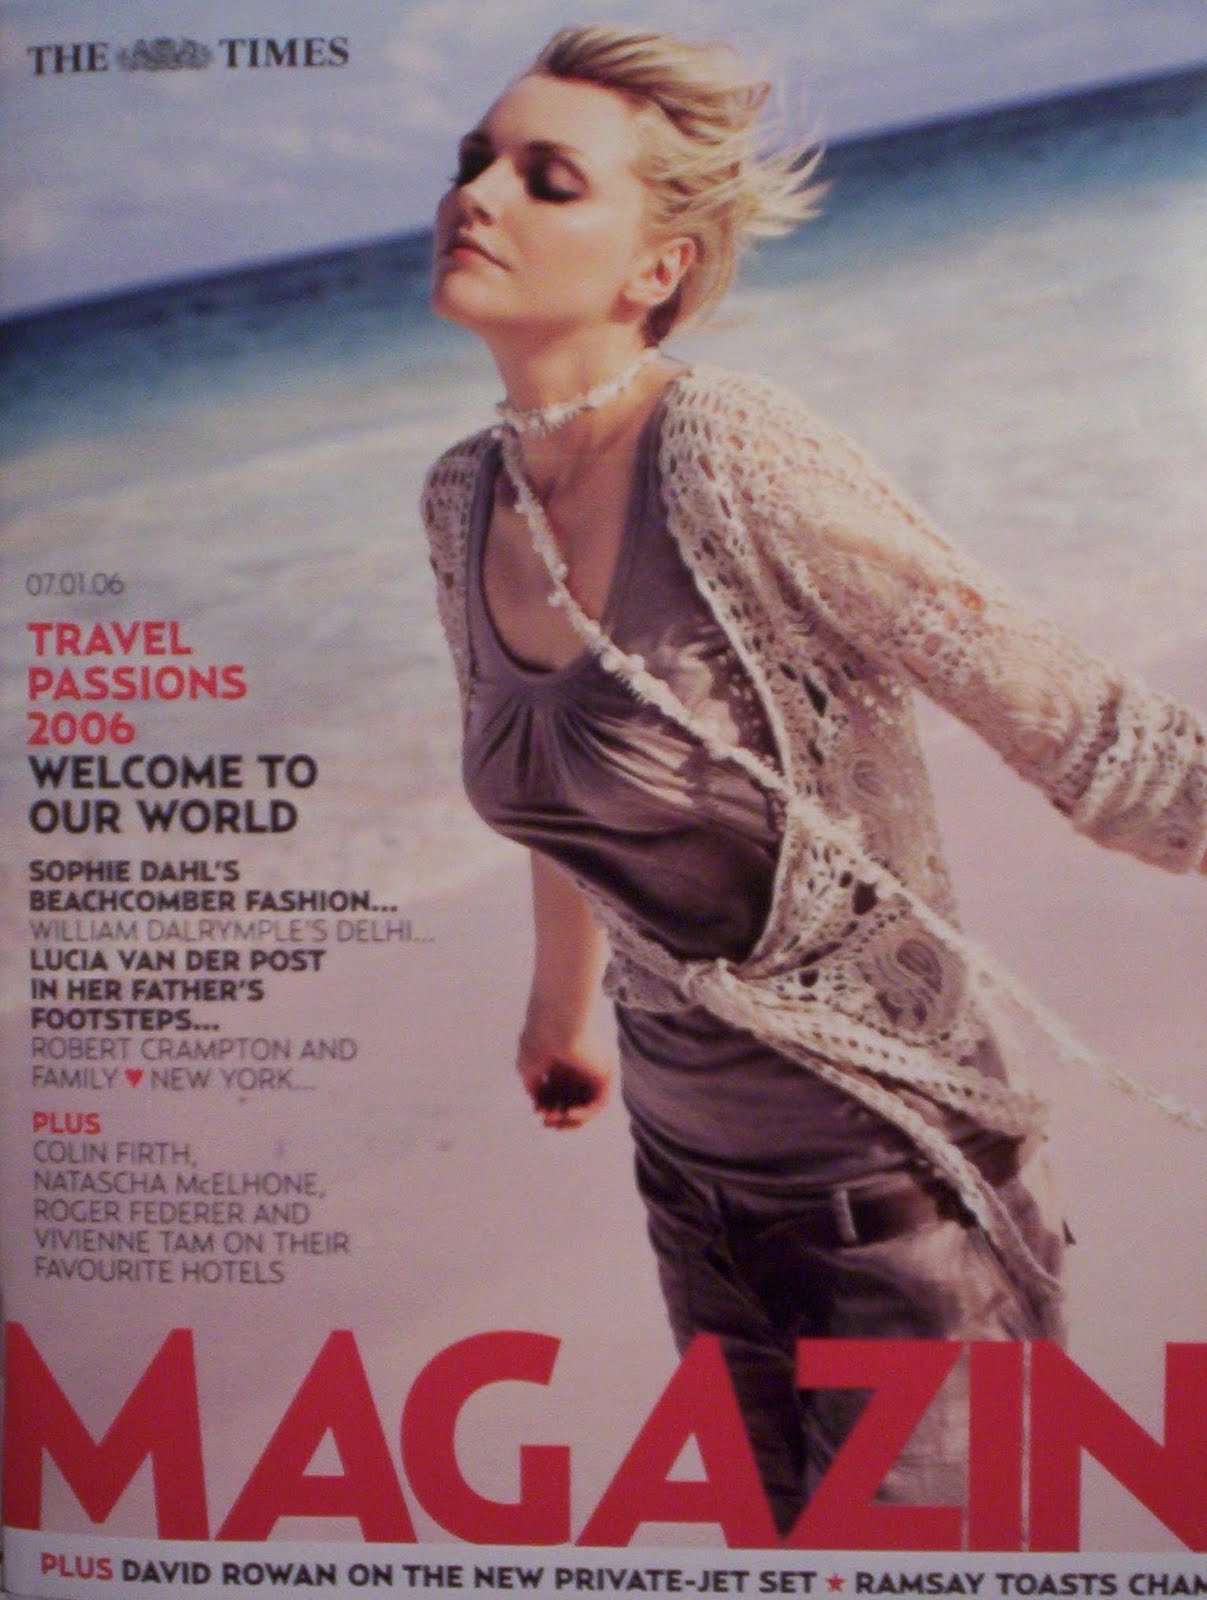 The Sophie Dahl Magazine Covers Pages: March 2011